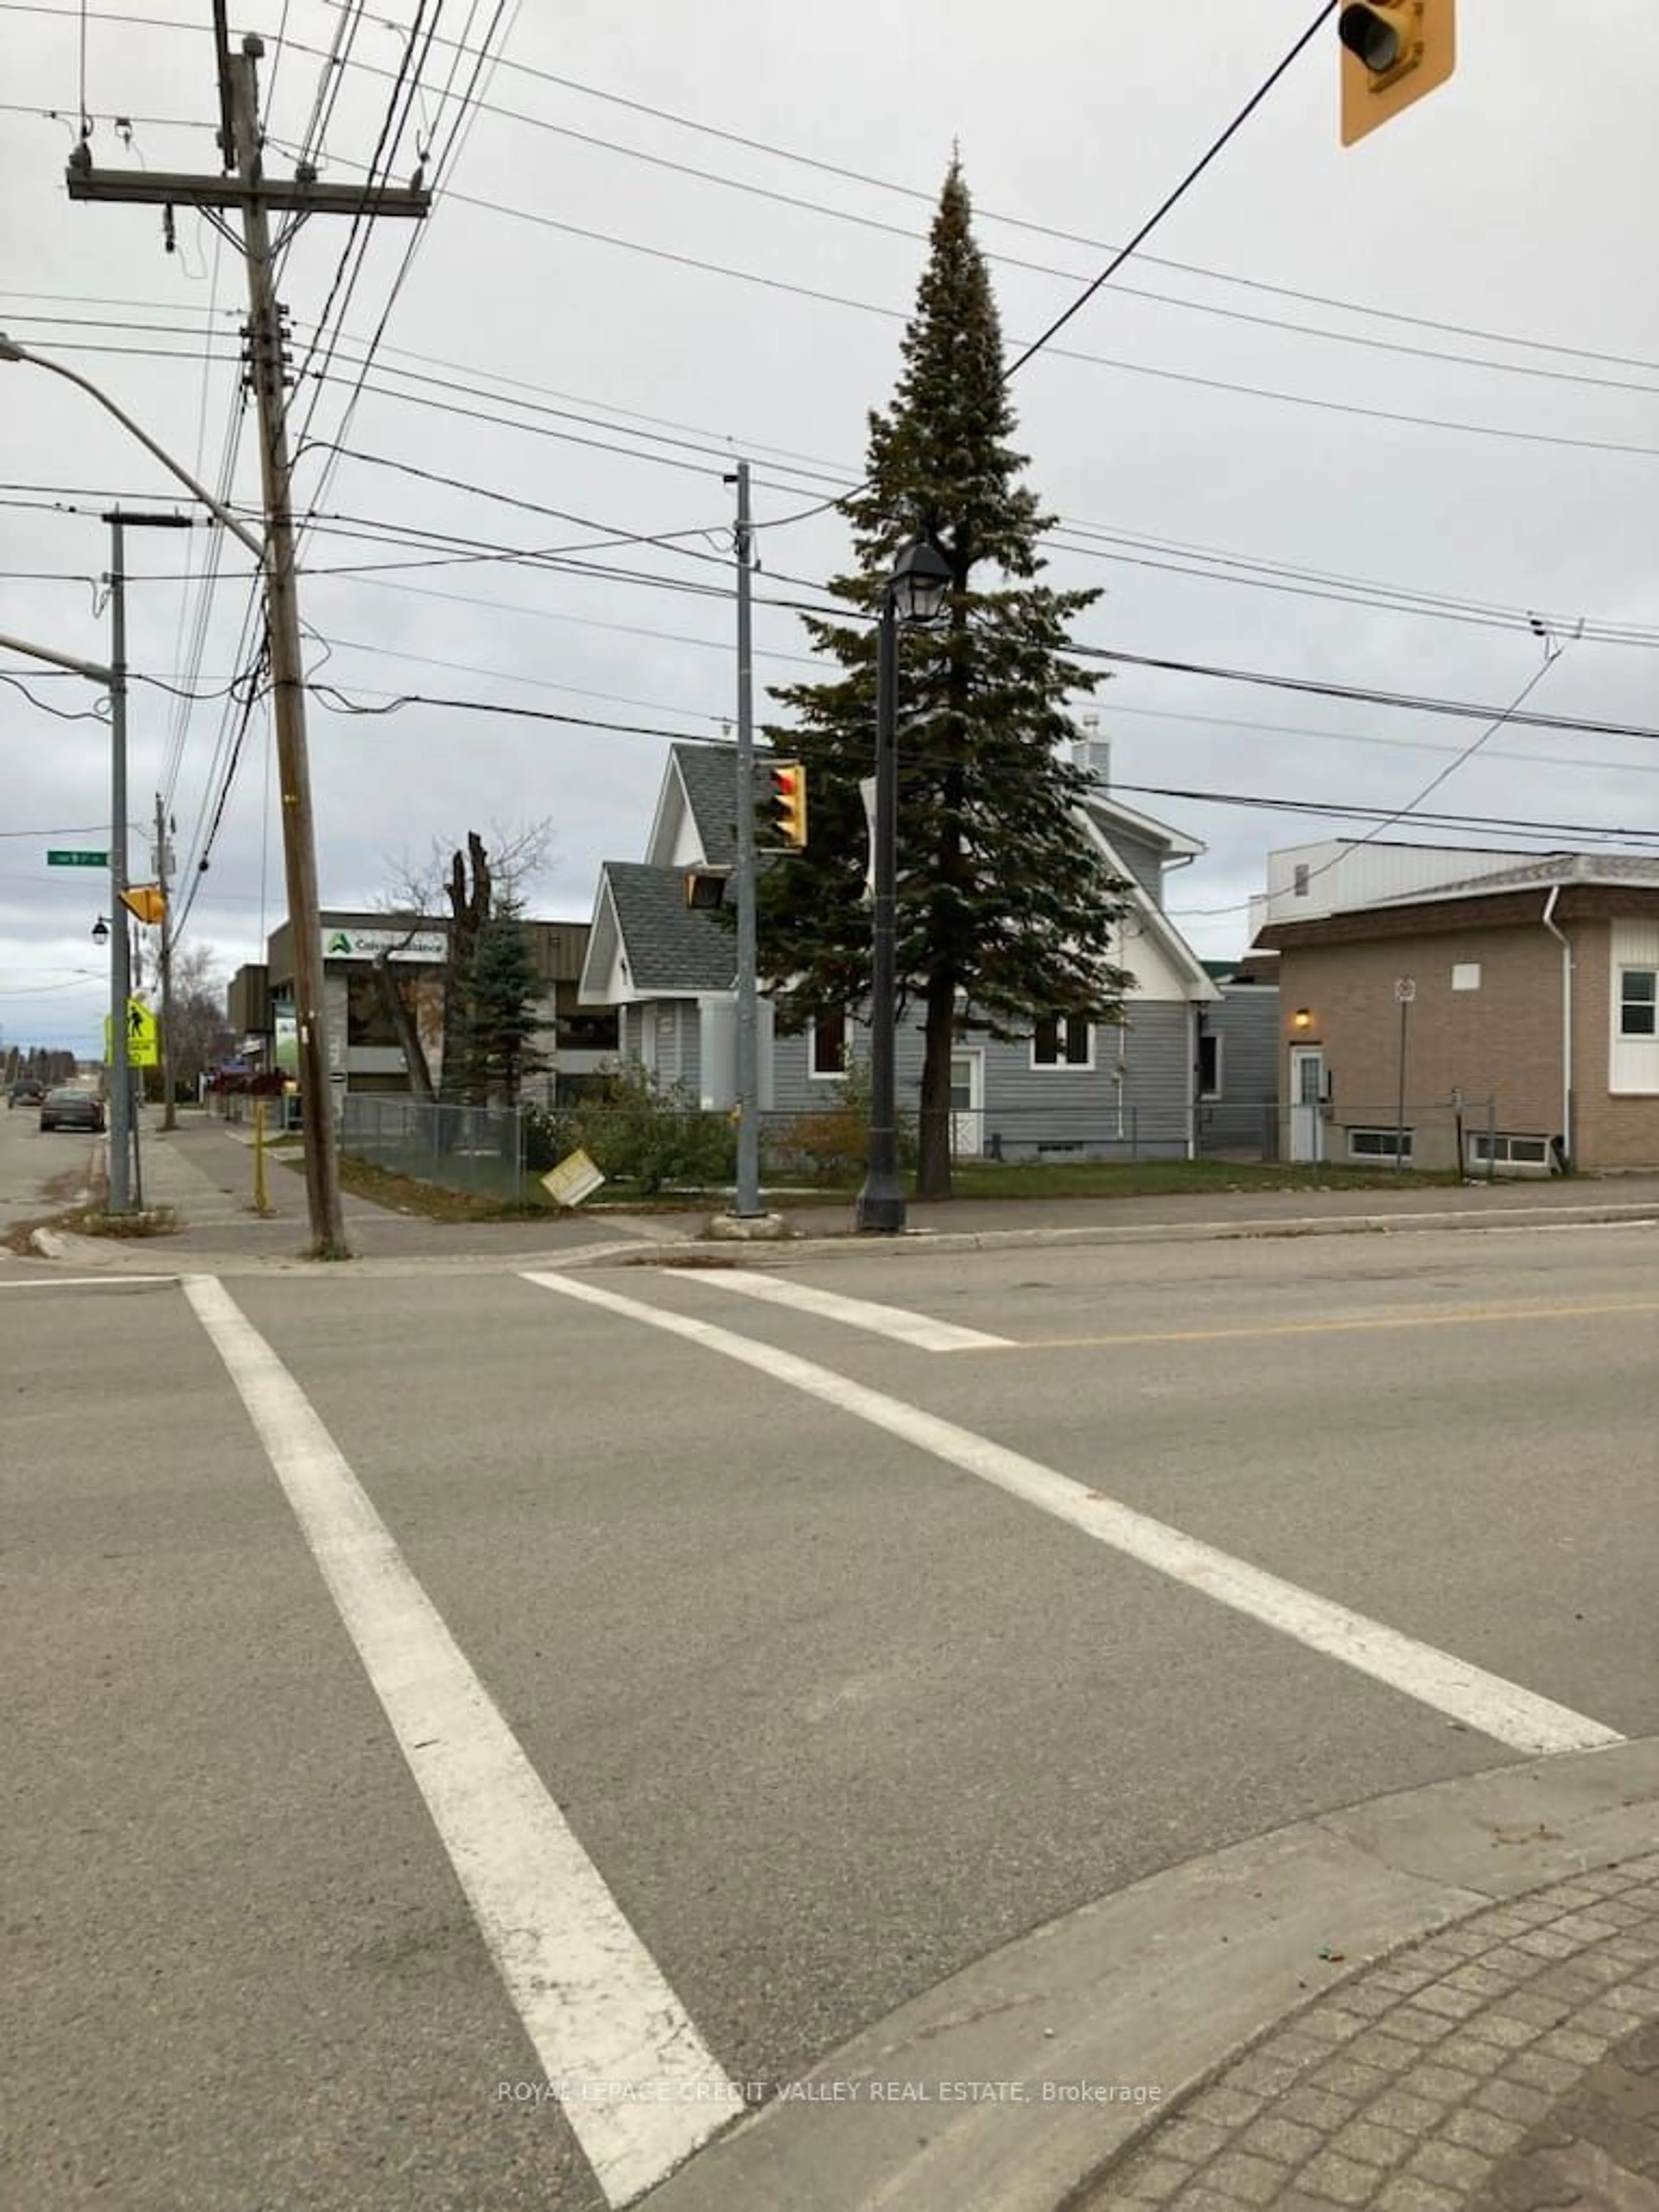 Street view for 900 Prince St, Hearst Ontario P0L 1N0